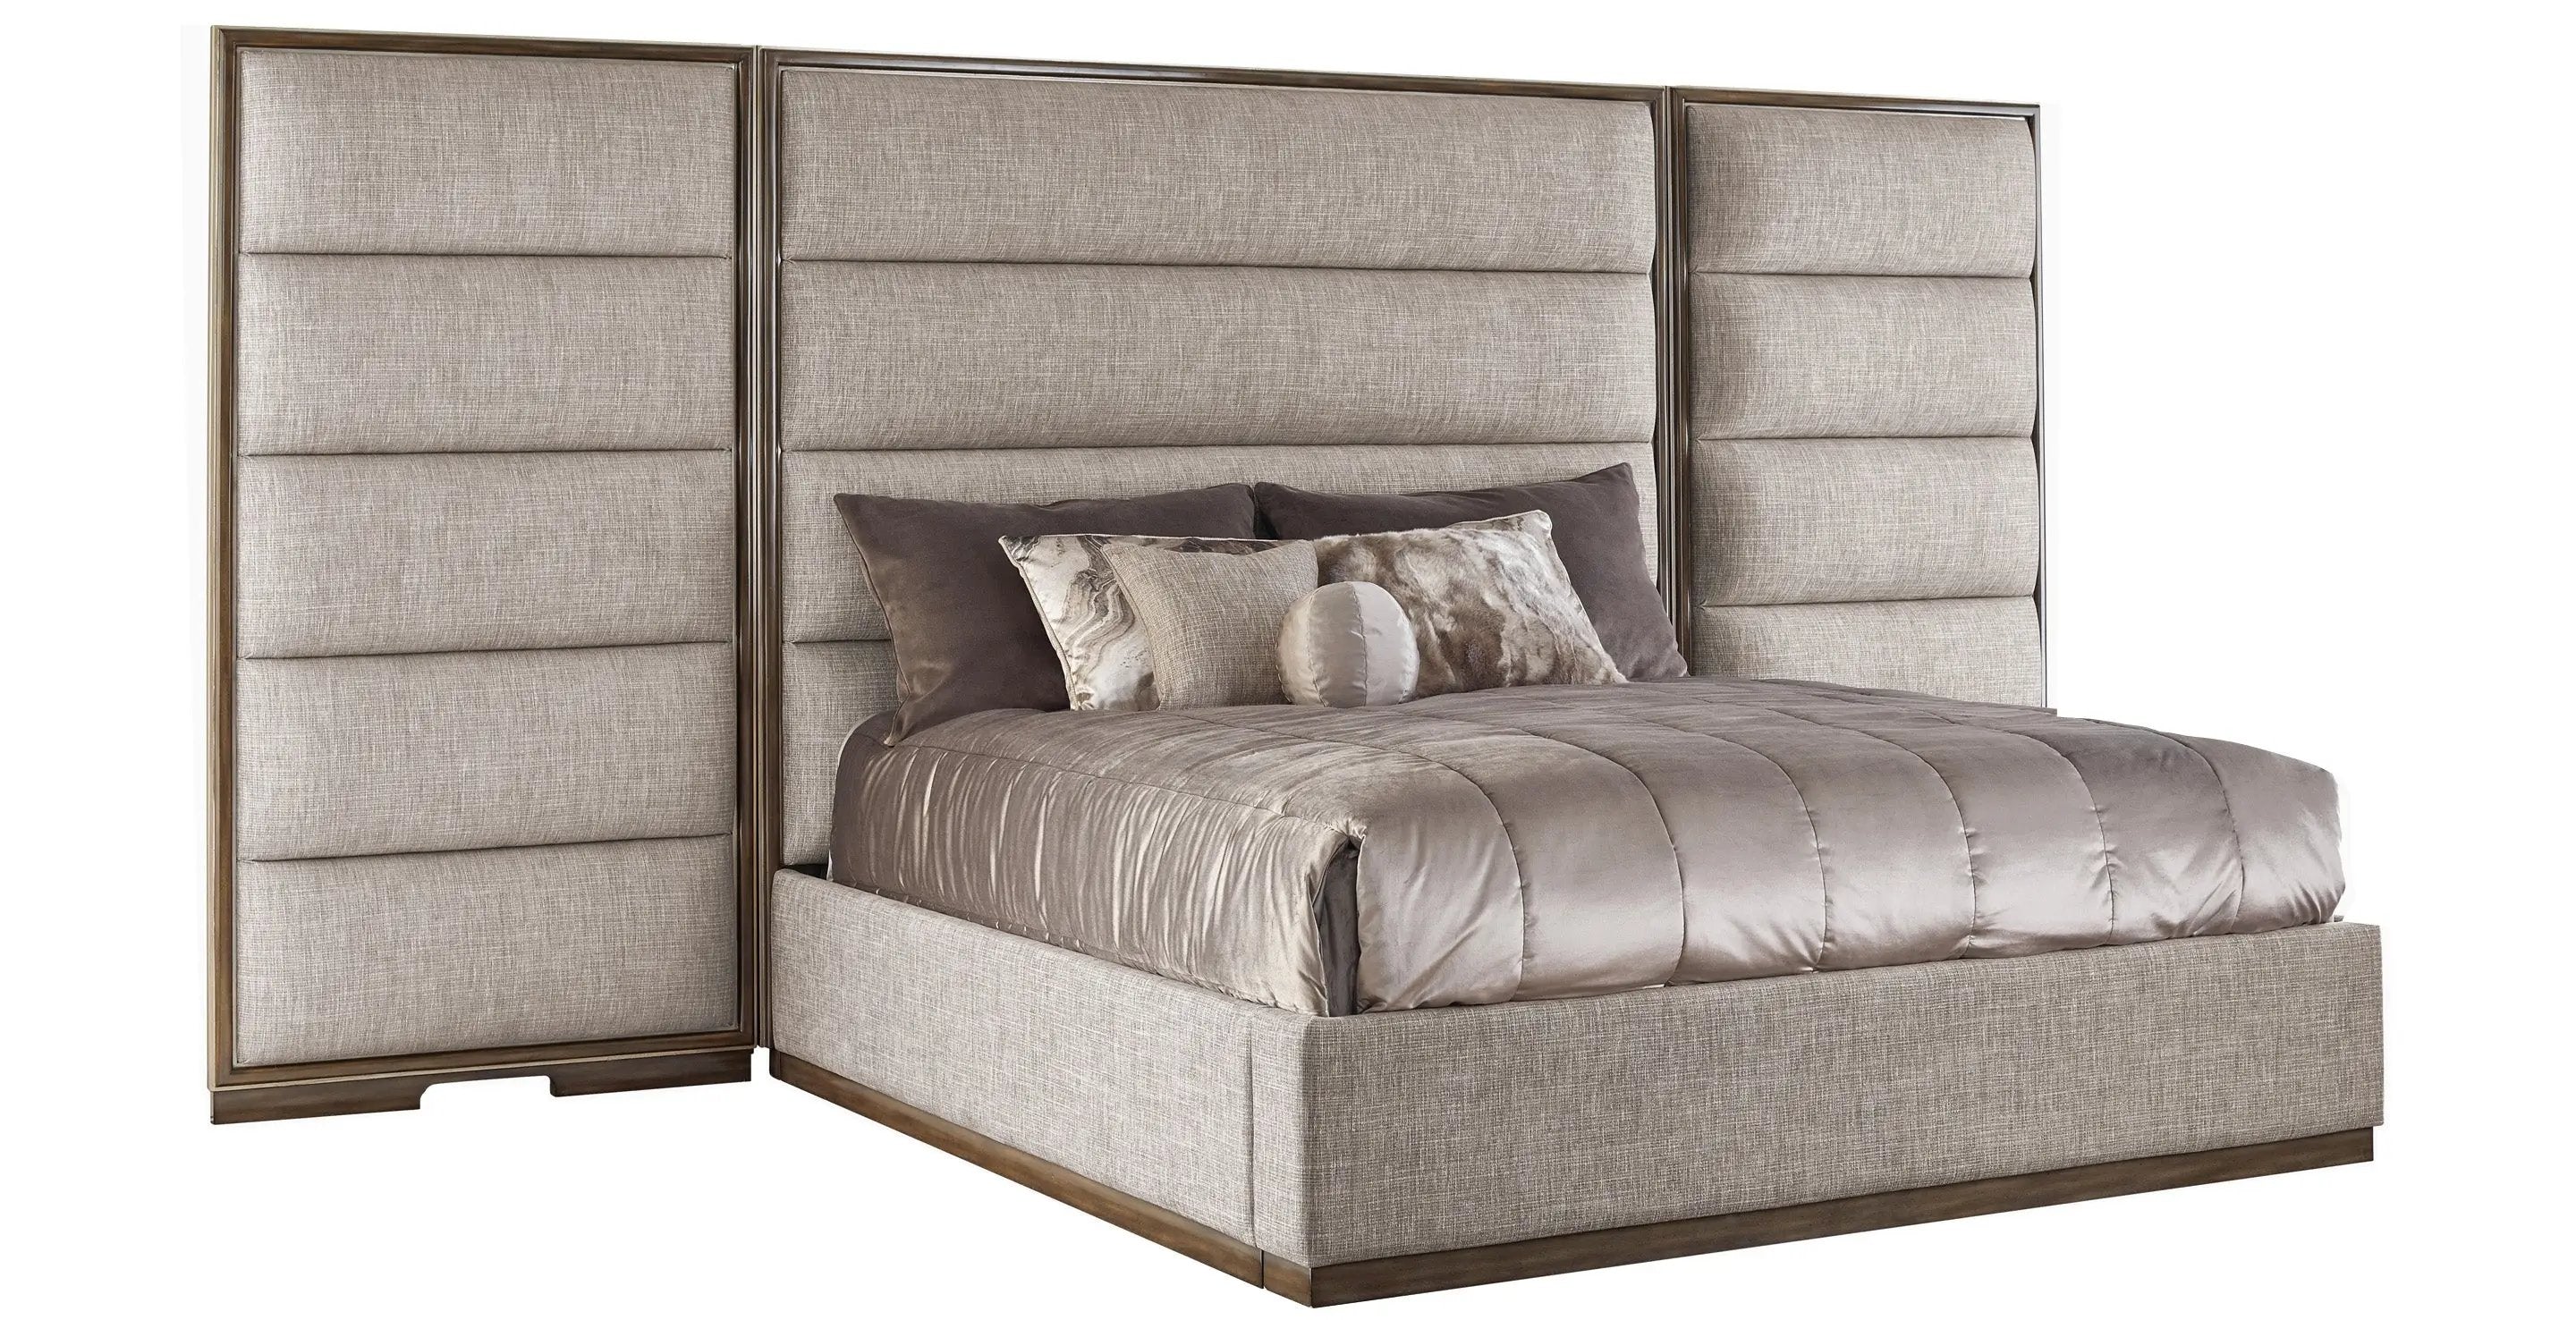 Palo Alto Contemporary Bed with Panels